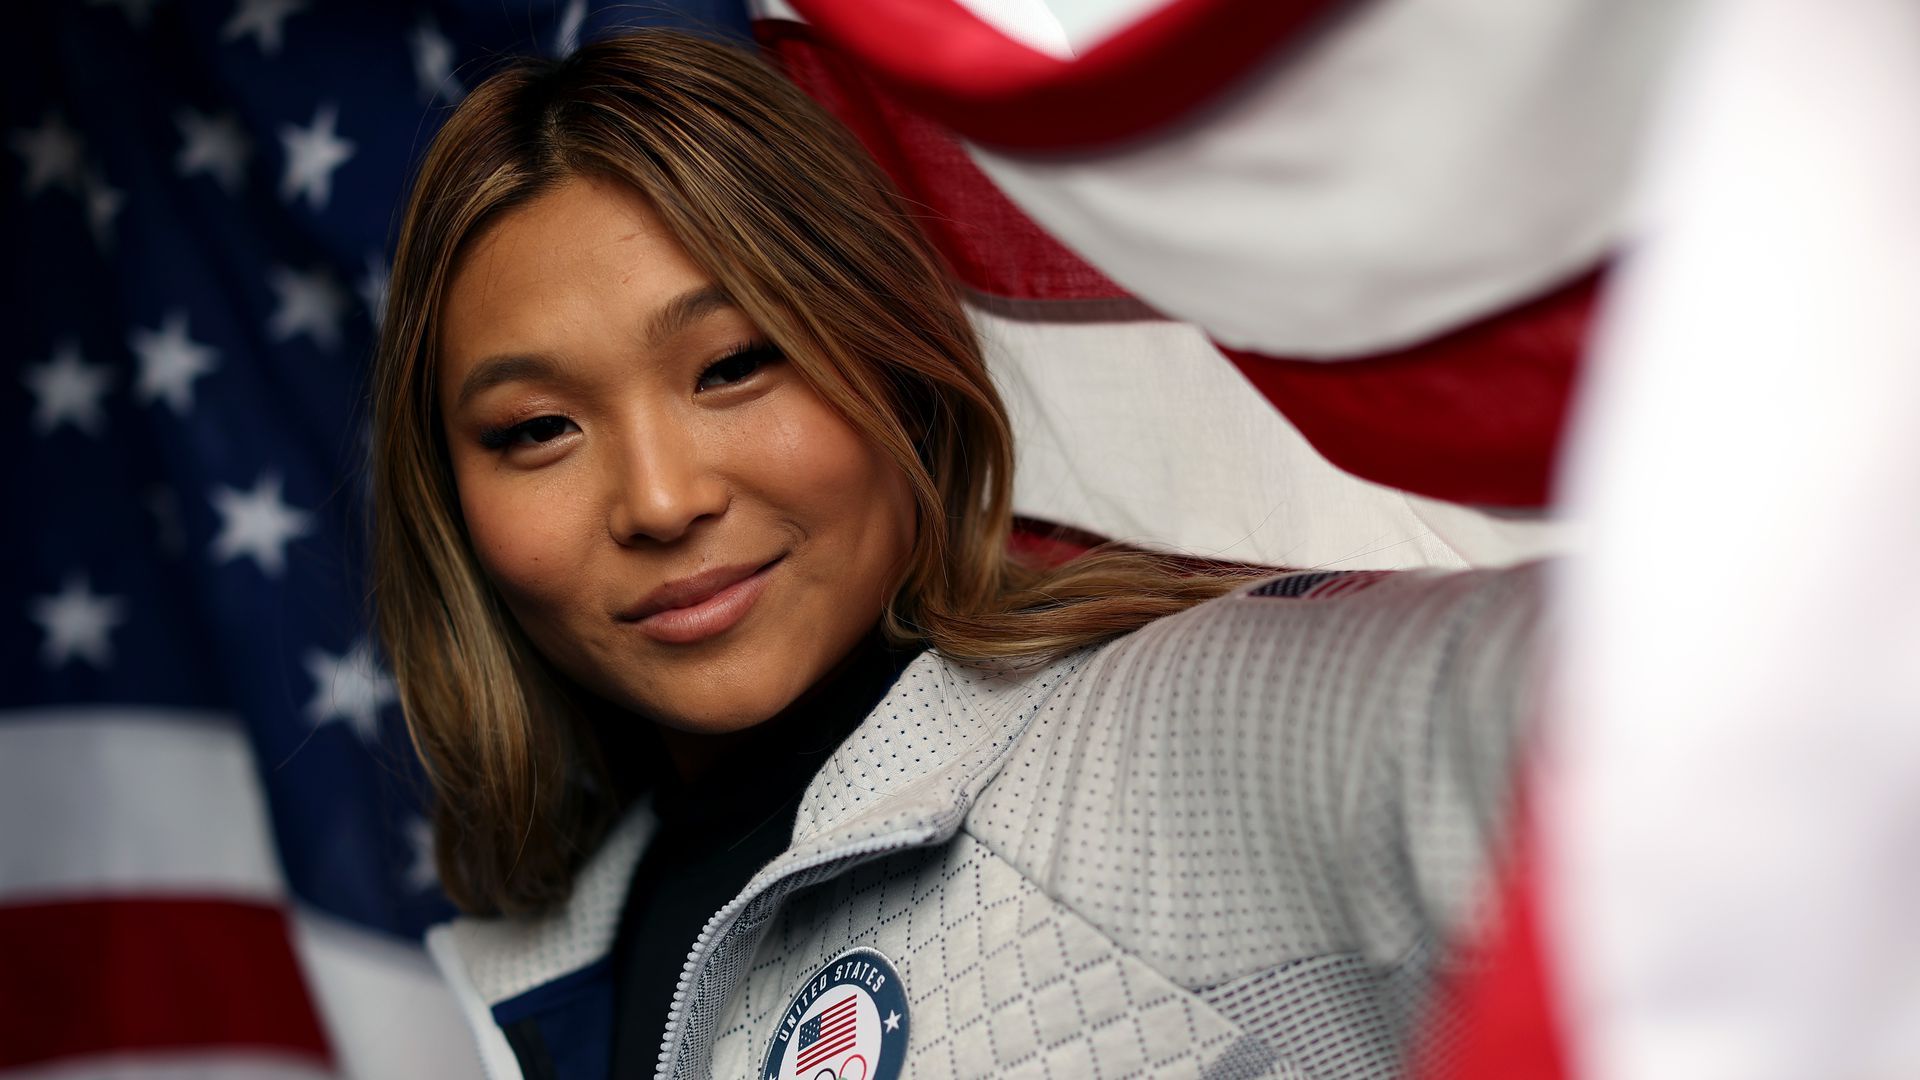 U.S. snowboarder Chloe Kim ready &quot;to go off&quot; in Winter Olympics after hiatus - Axios